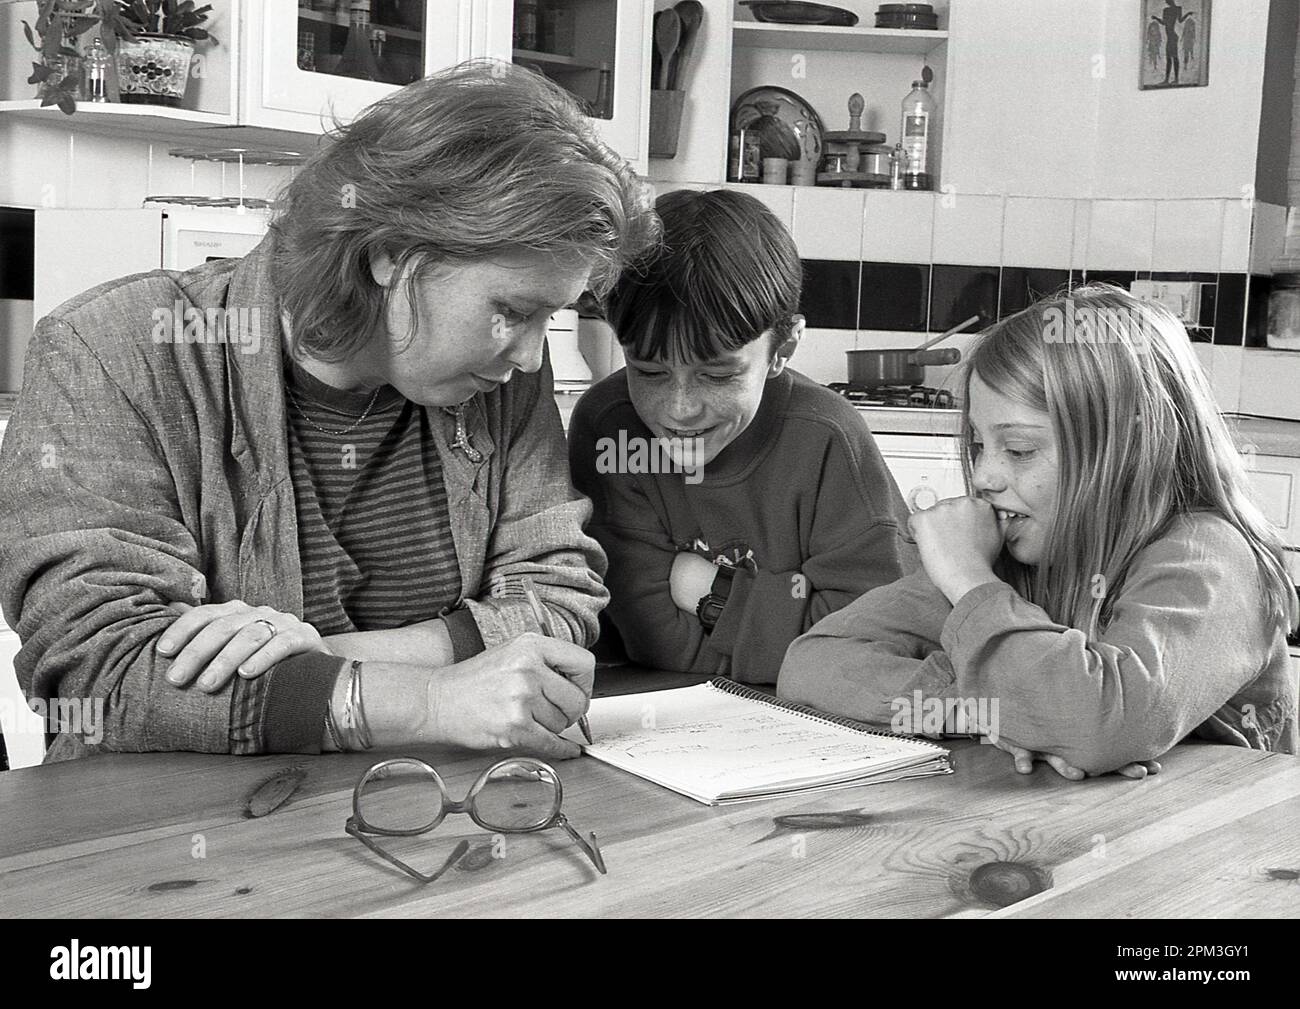 Woman helping children with homework / home schooling, UK 1990s Posed Stock Photo